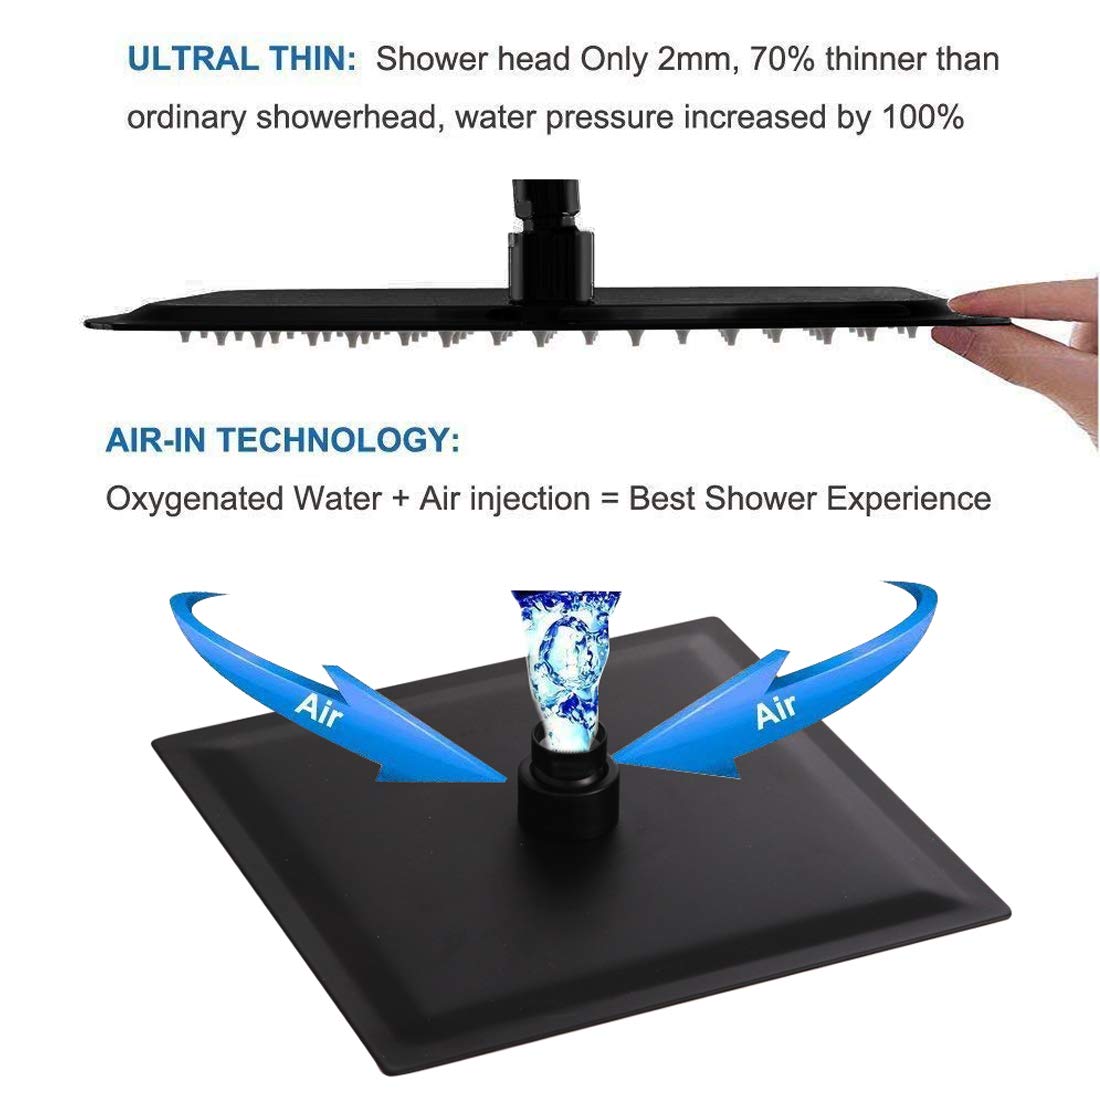 POP SANITARYWARE Matte Black Shower Faucet Set, Bathroom Rainfall Shower System with Stainless Steel Metal Showerhead, Single Function Shower Trim Kit with Rough-in Valve